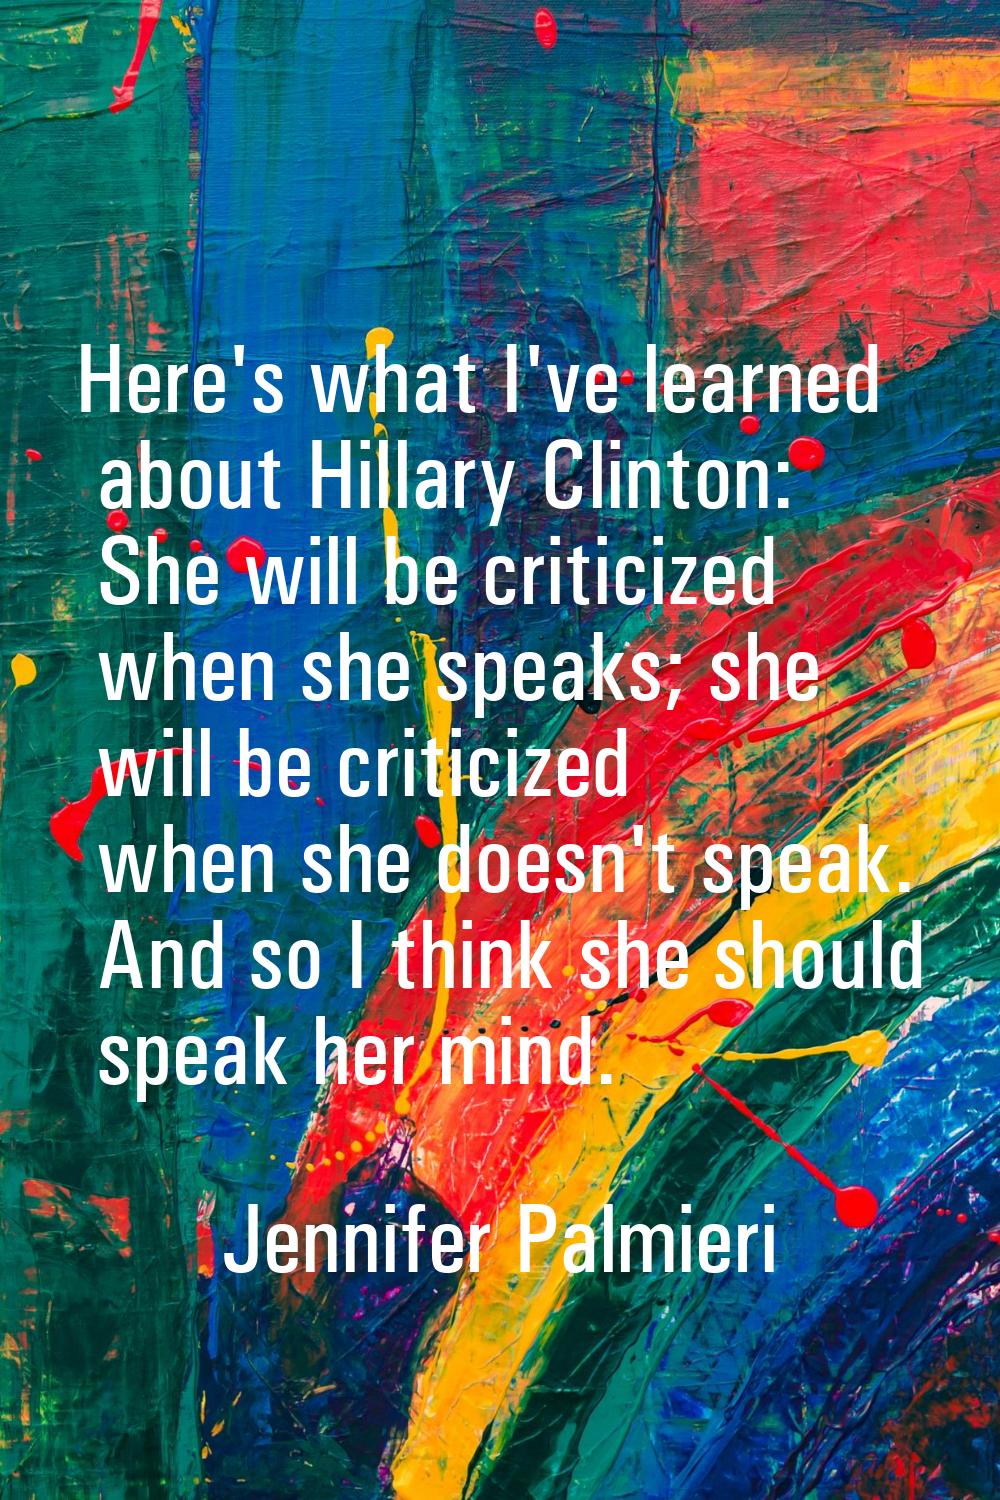 Here's what I've learned about Hillary Clinton: She will be criticized when she speaks; she will be